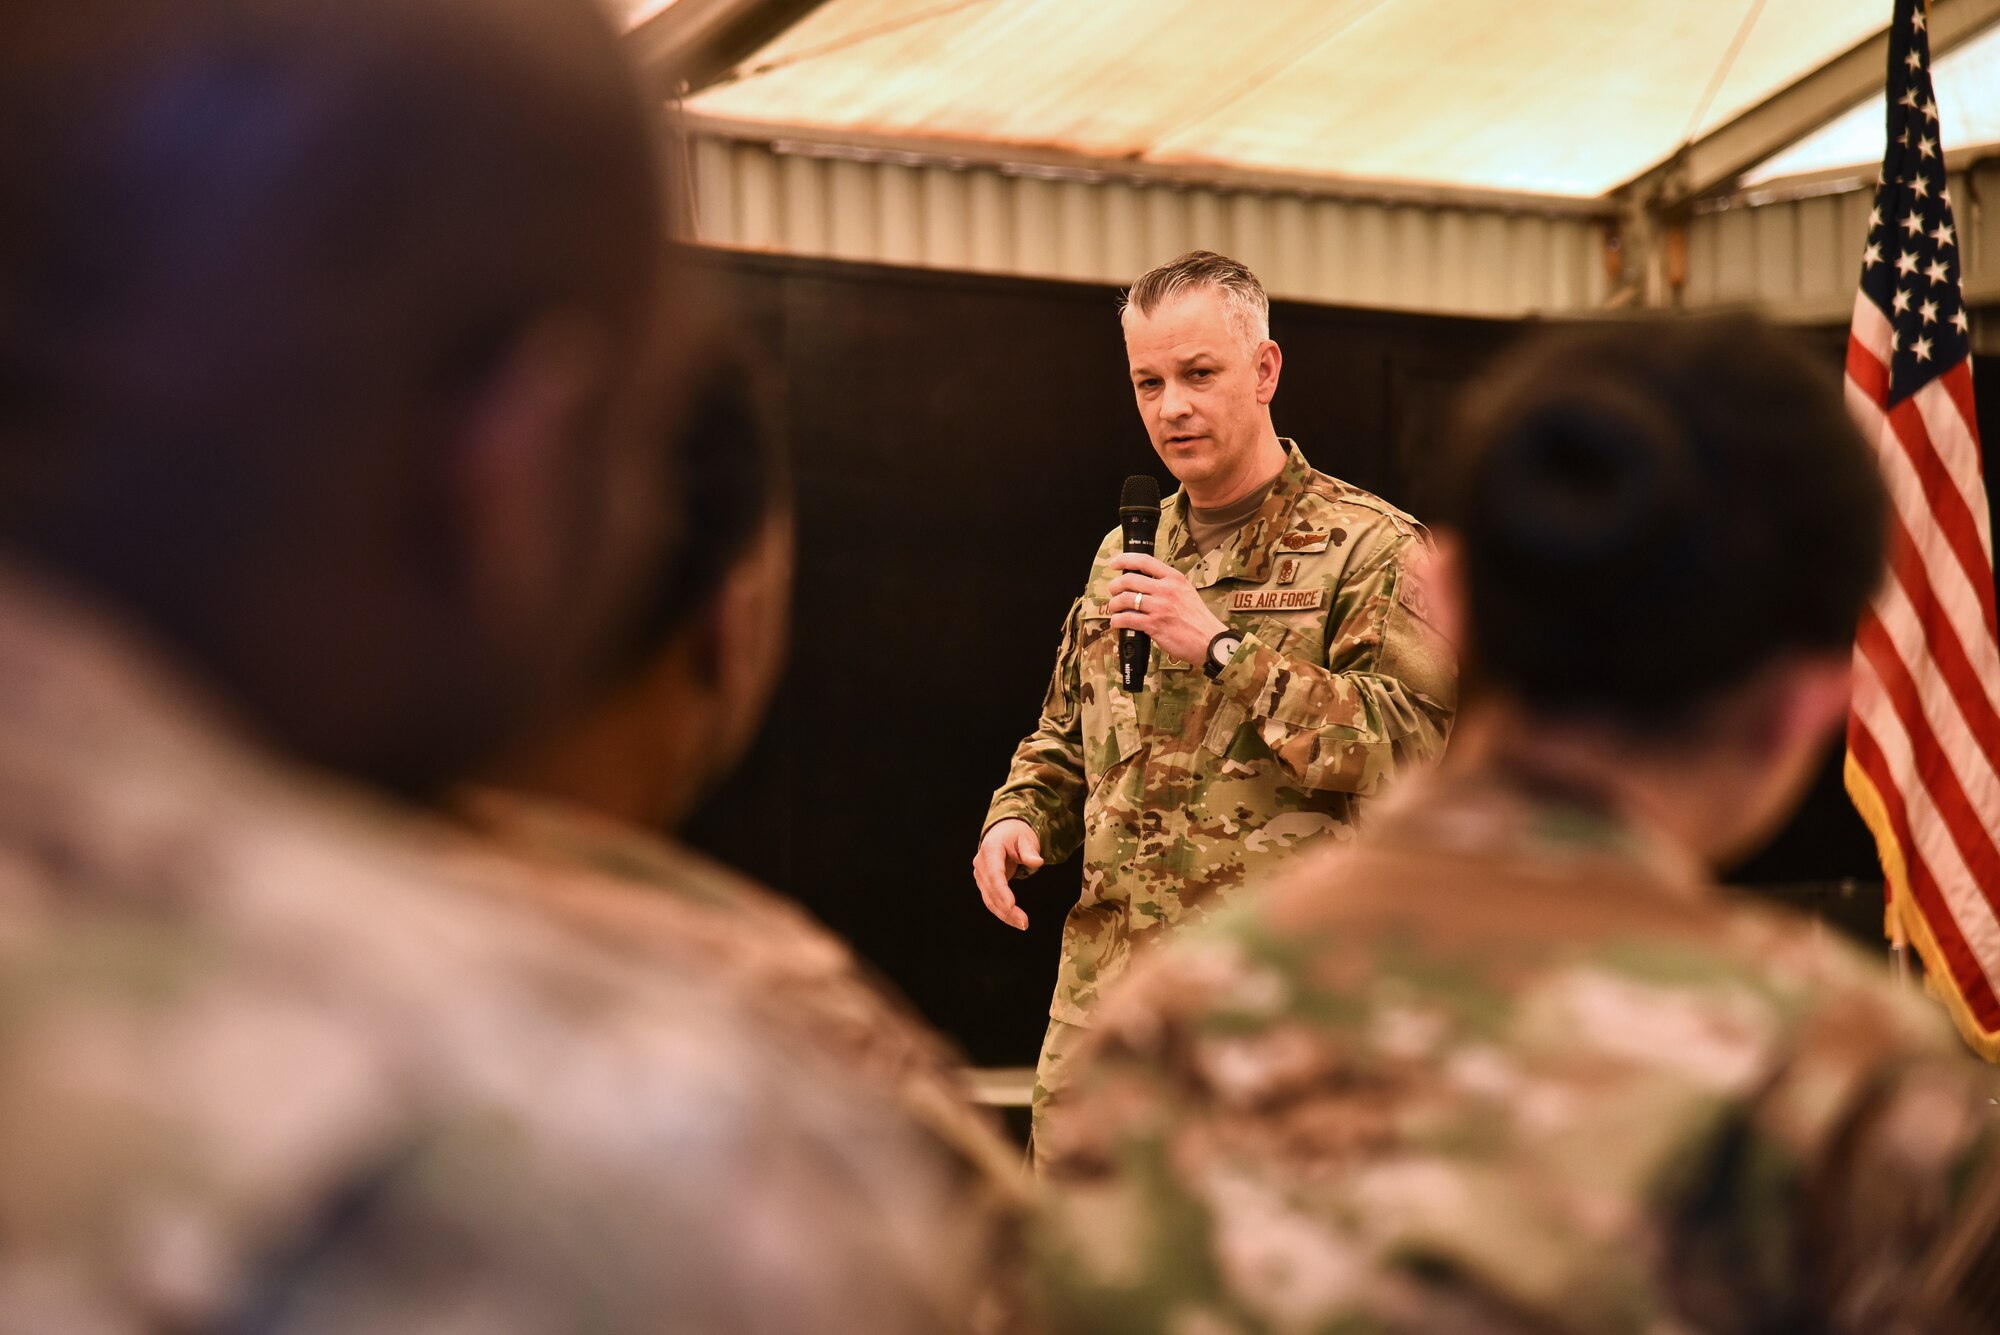 U.S. Air Force Chief Master Sgt. Steven Cum, Chief of Medical Enlisted Force and Enlisted Corps Chief, speaks to the 380th Expeditionary Medical Group at Al Dhafra Air Base, United Arab Emirates, Nov. 11, 2018. Cum is the personal advisor to the USAF Surgeon General on all issues regarding the welfare, readiness, morale, and proper utilization and progression for the 34,000 total force medical enlisted community. (U.S. Air Force photo by Senior Airman Mya M. Crosby)